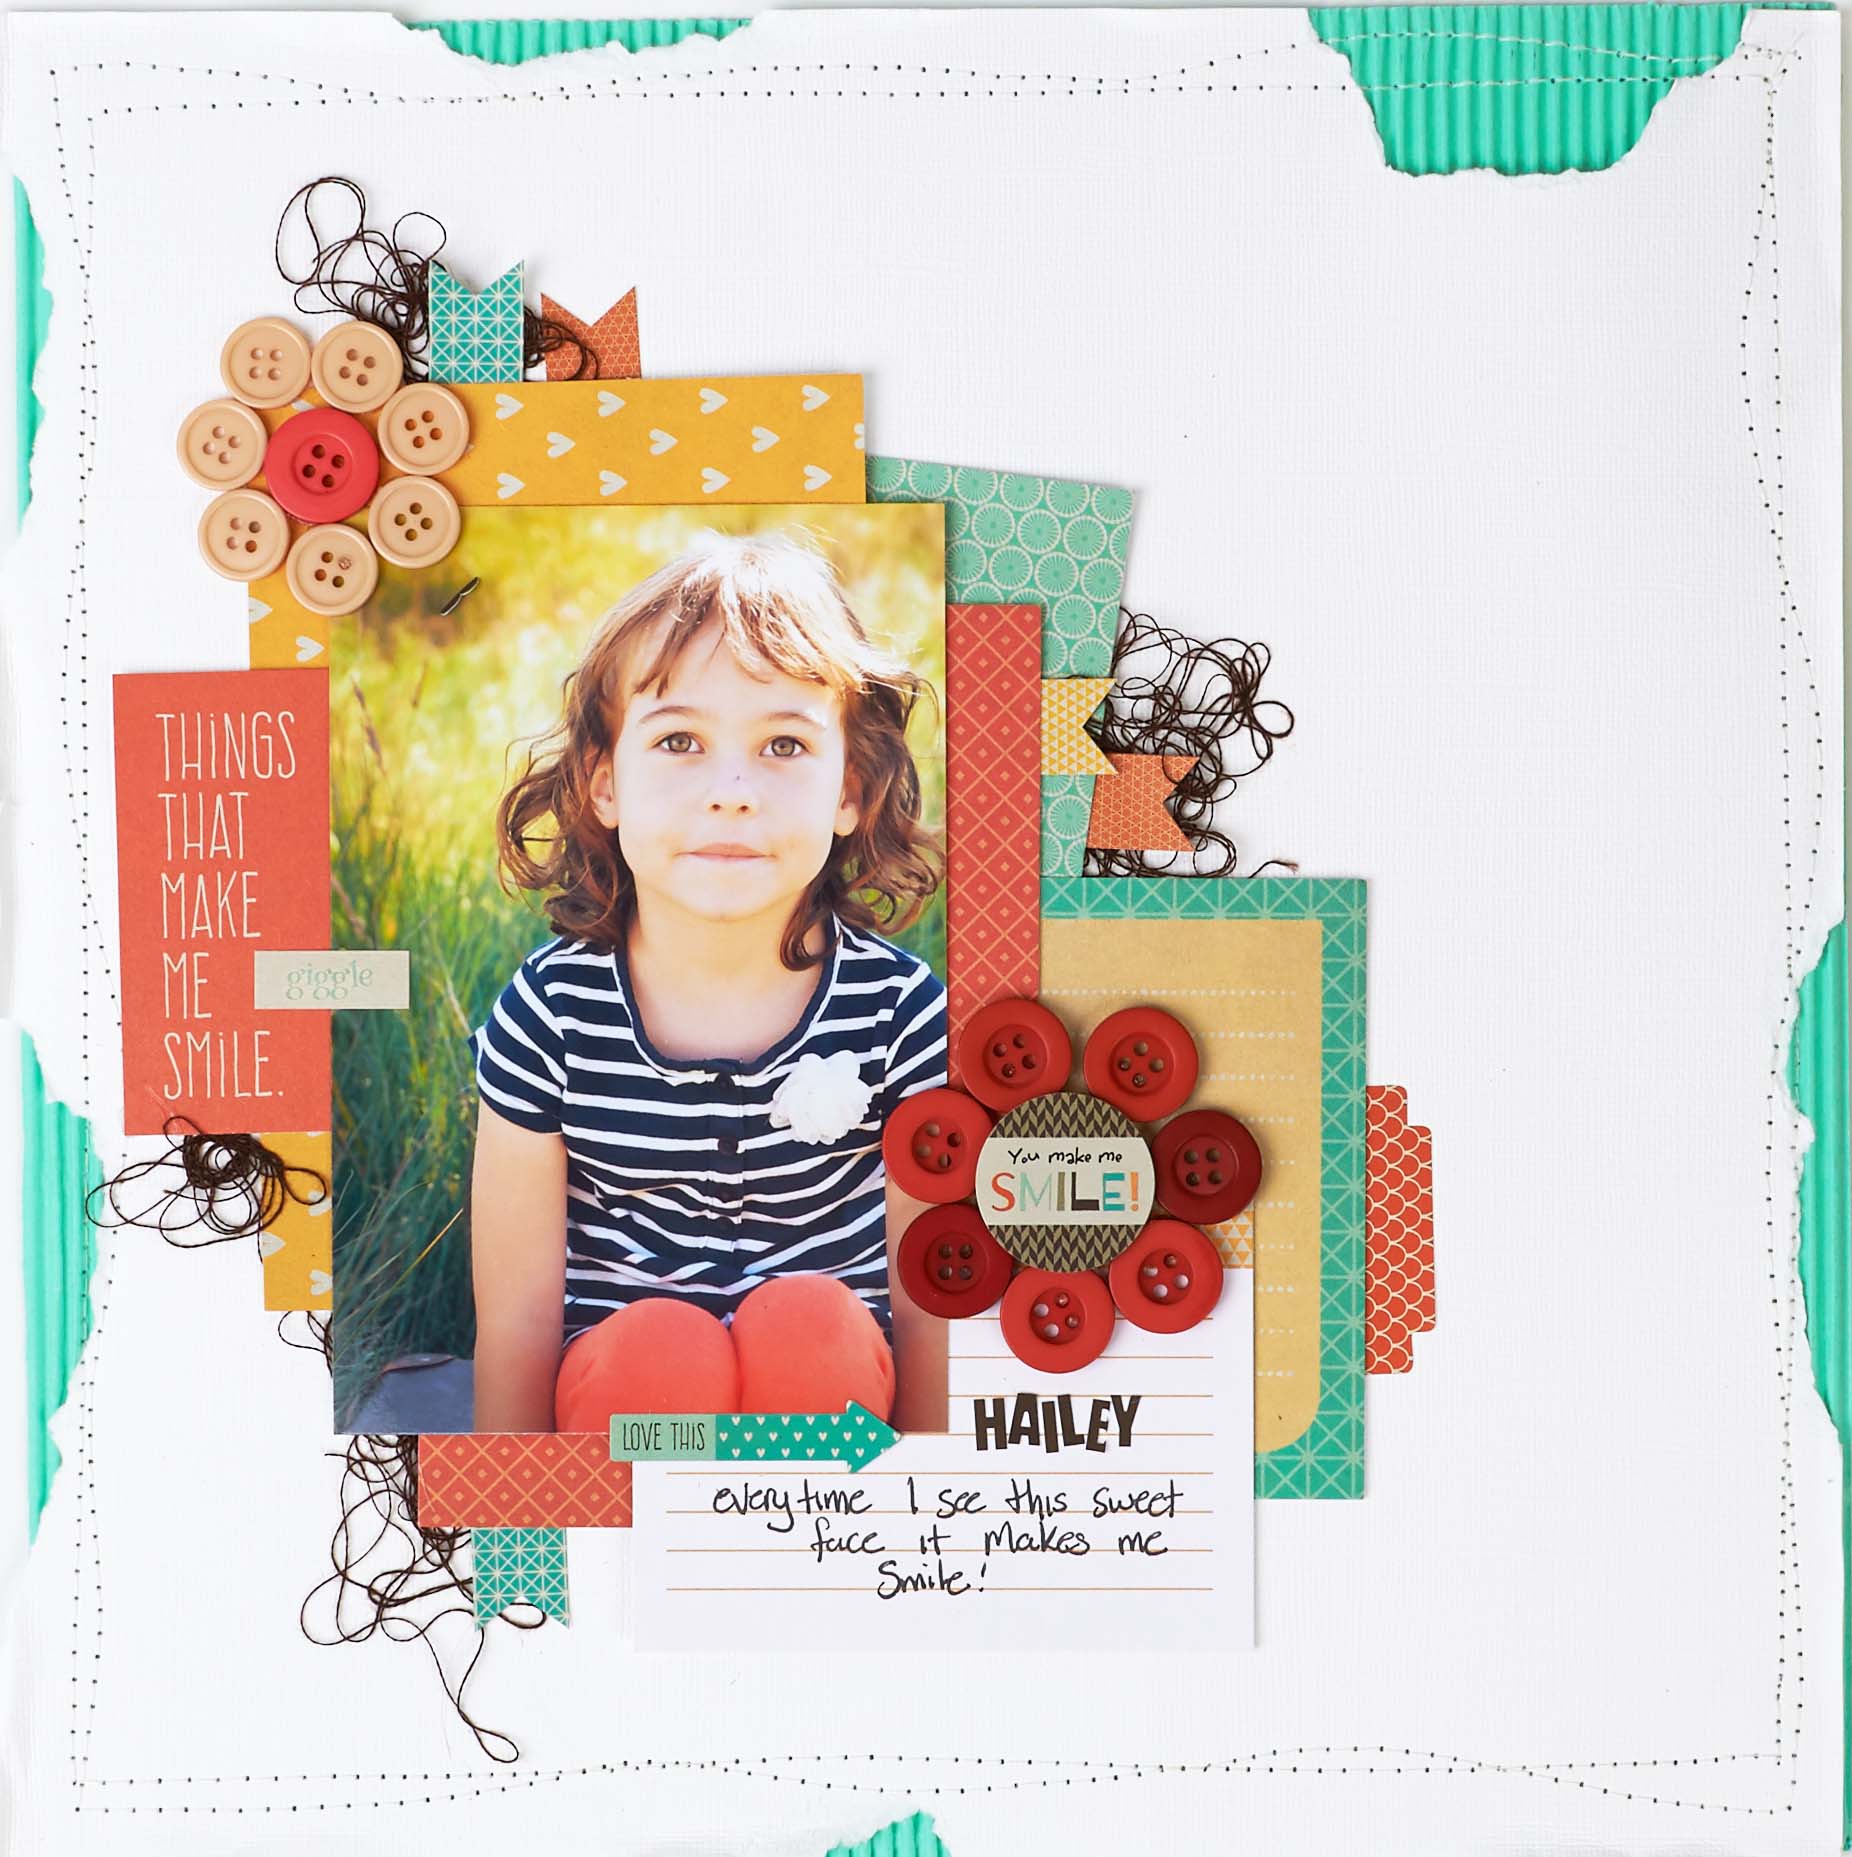 Scrapbook Layout Featuring Sewing | Designed by Christy Riopel | Creative Scrapbooker Magazine #scrapbooking #rememberingchristy